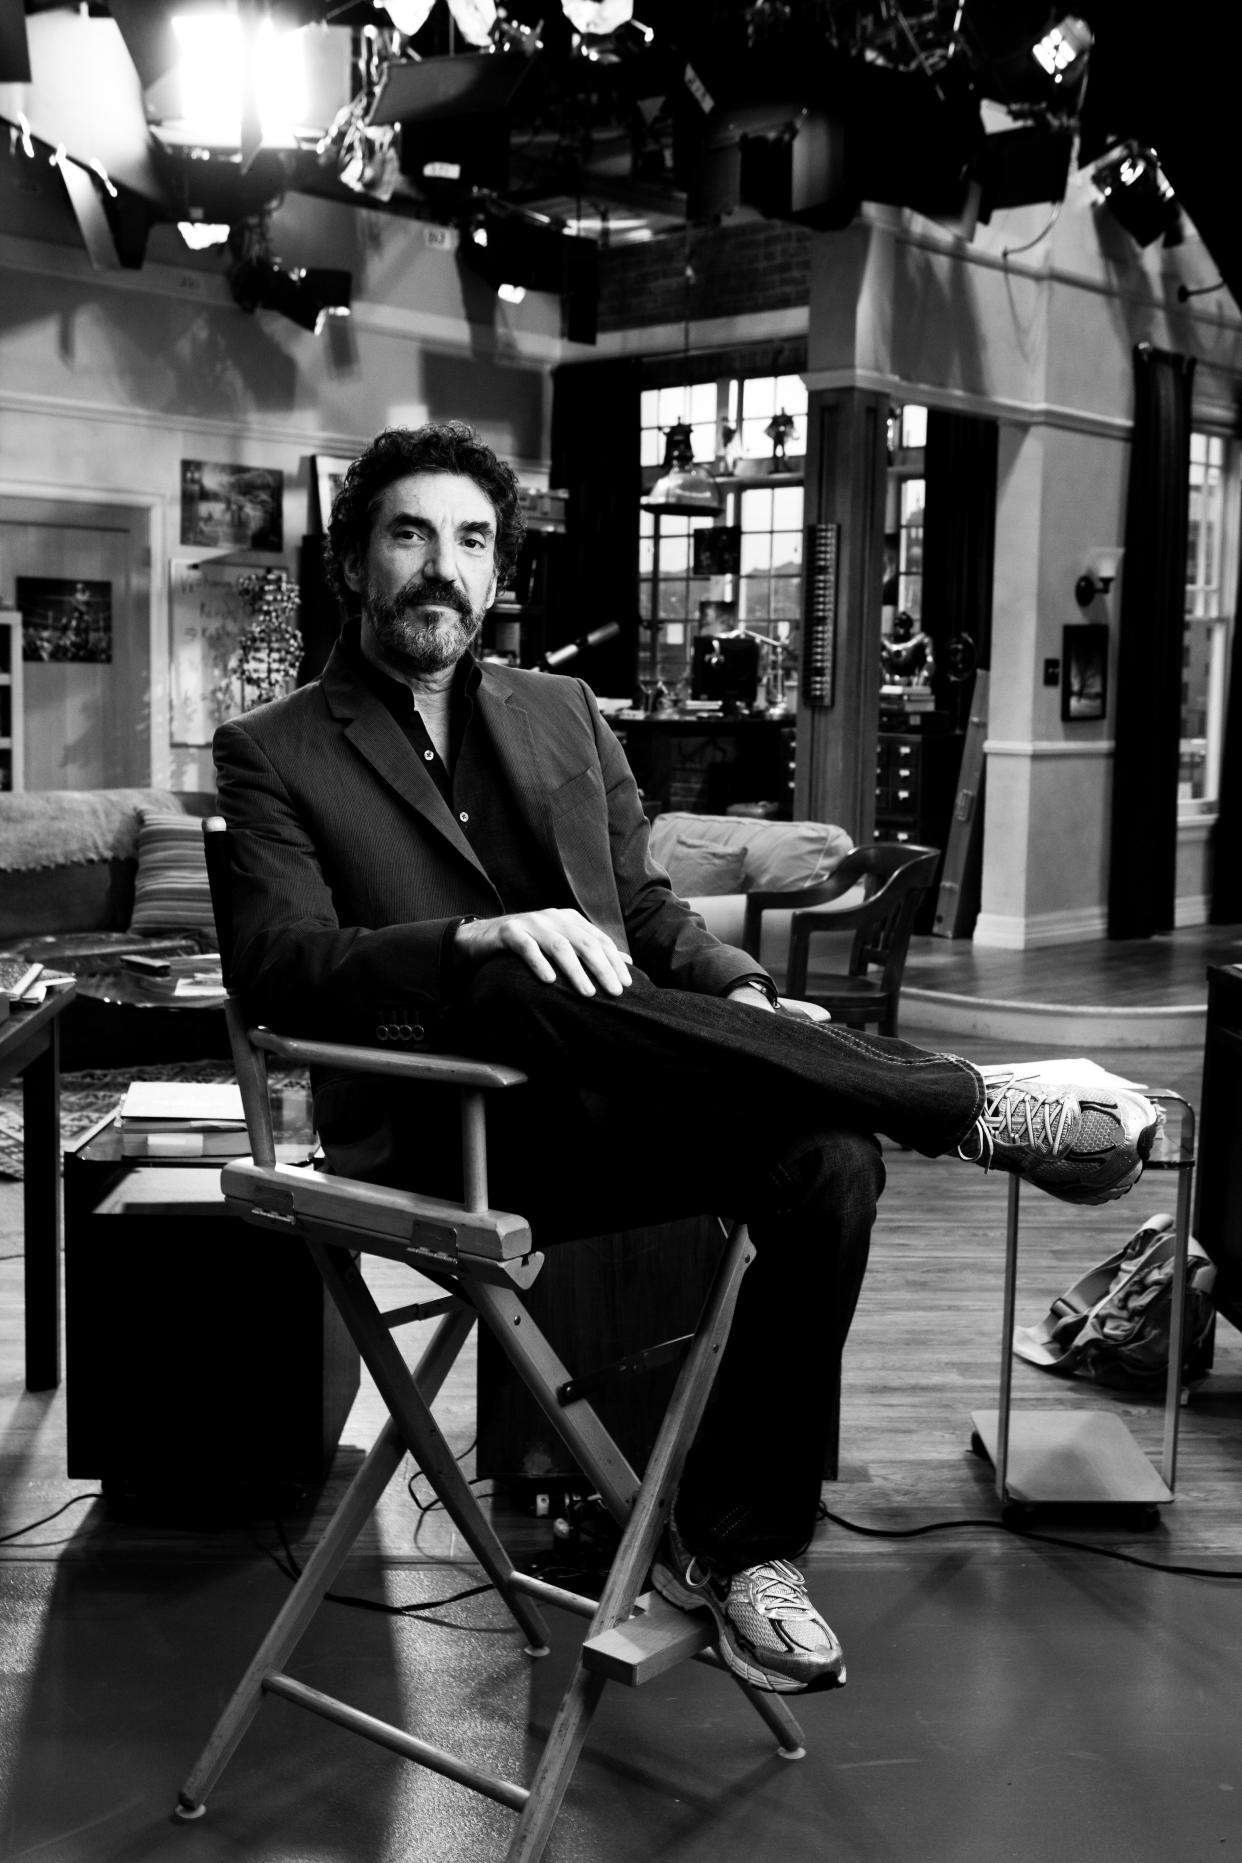 The producer Chuck Lorre, co-creator of “The Big Bang Theory,” at Warner Bros. studios in Burbank, Calif., on Sept. 3, 2009. (Kevin Scanlon/The New York Times)